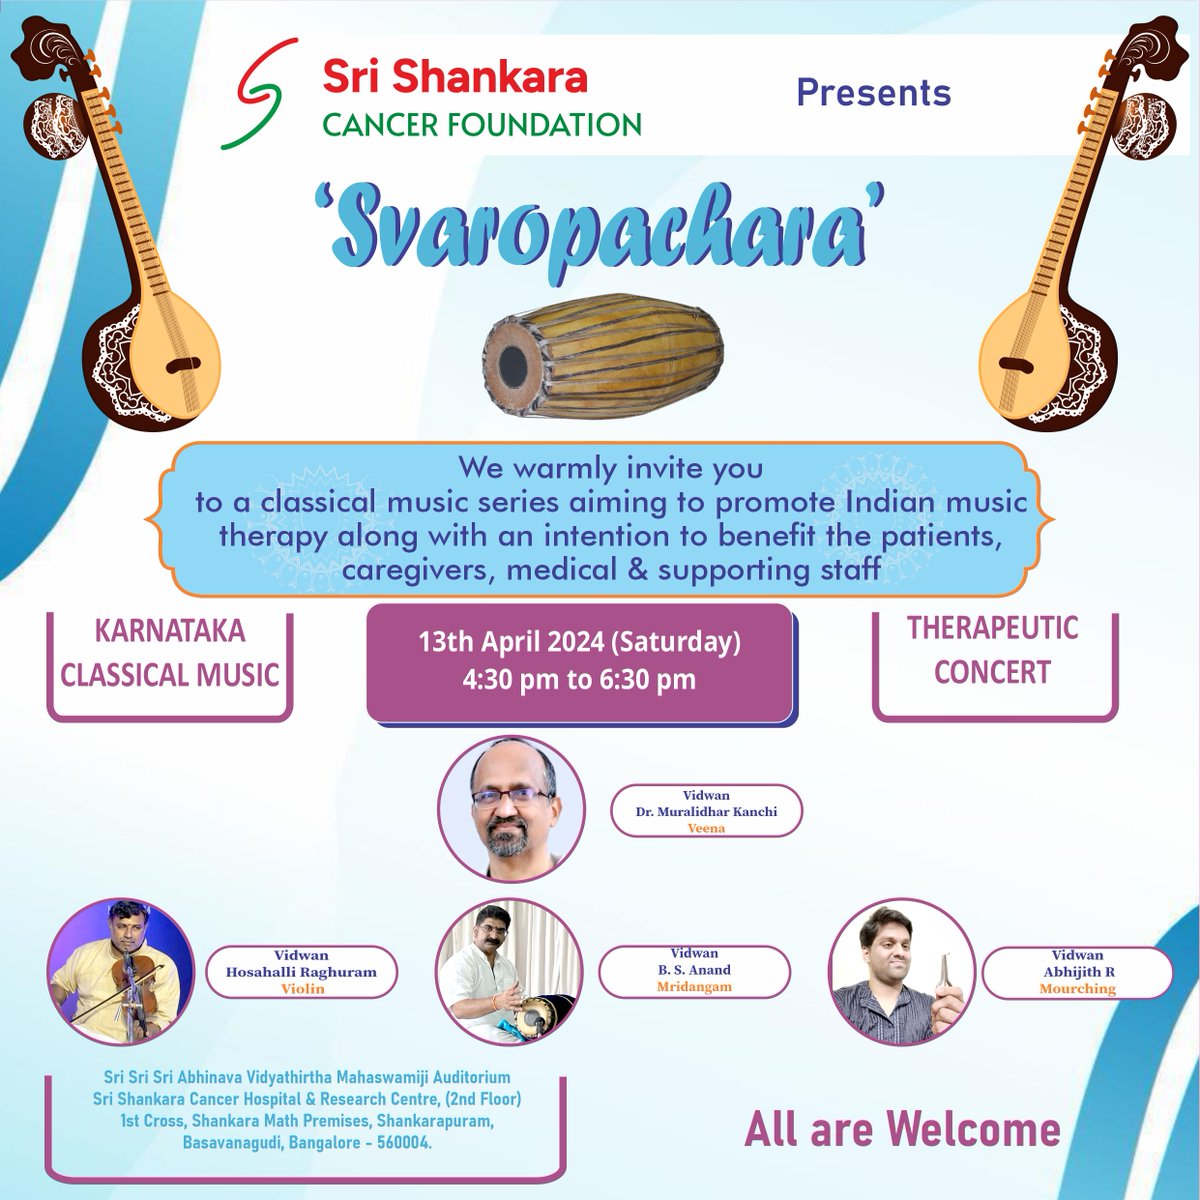 We are excited to announce the next episode of Svaropachara – Therapeutic Classical Music Concert at Sri Shankara Cancer Hospital & Research Centre, Bangalore

#shankaracancerhospitals #music #therapy #TherapyOptions #ClassicalMusic #classicalart #Concert #Bengaluru #Indian #YES